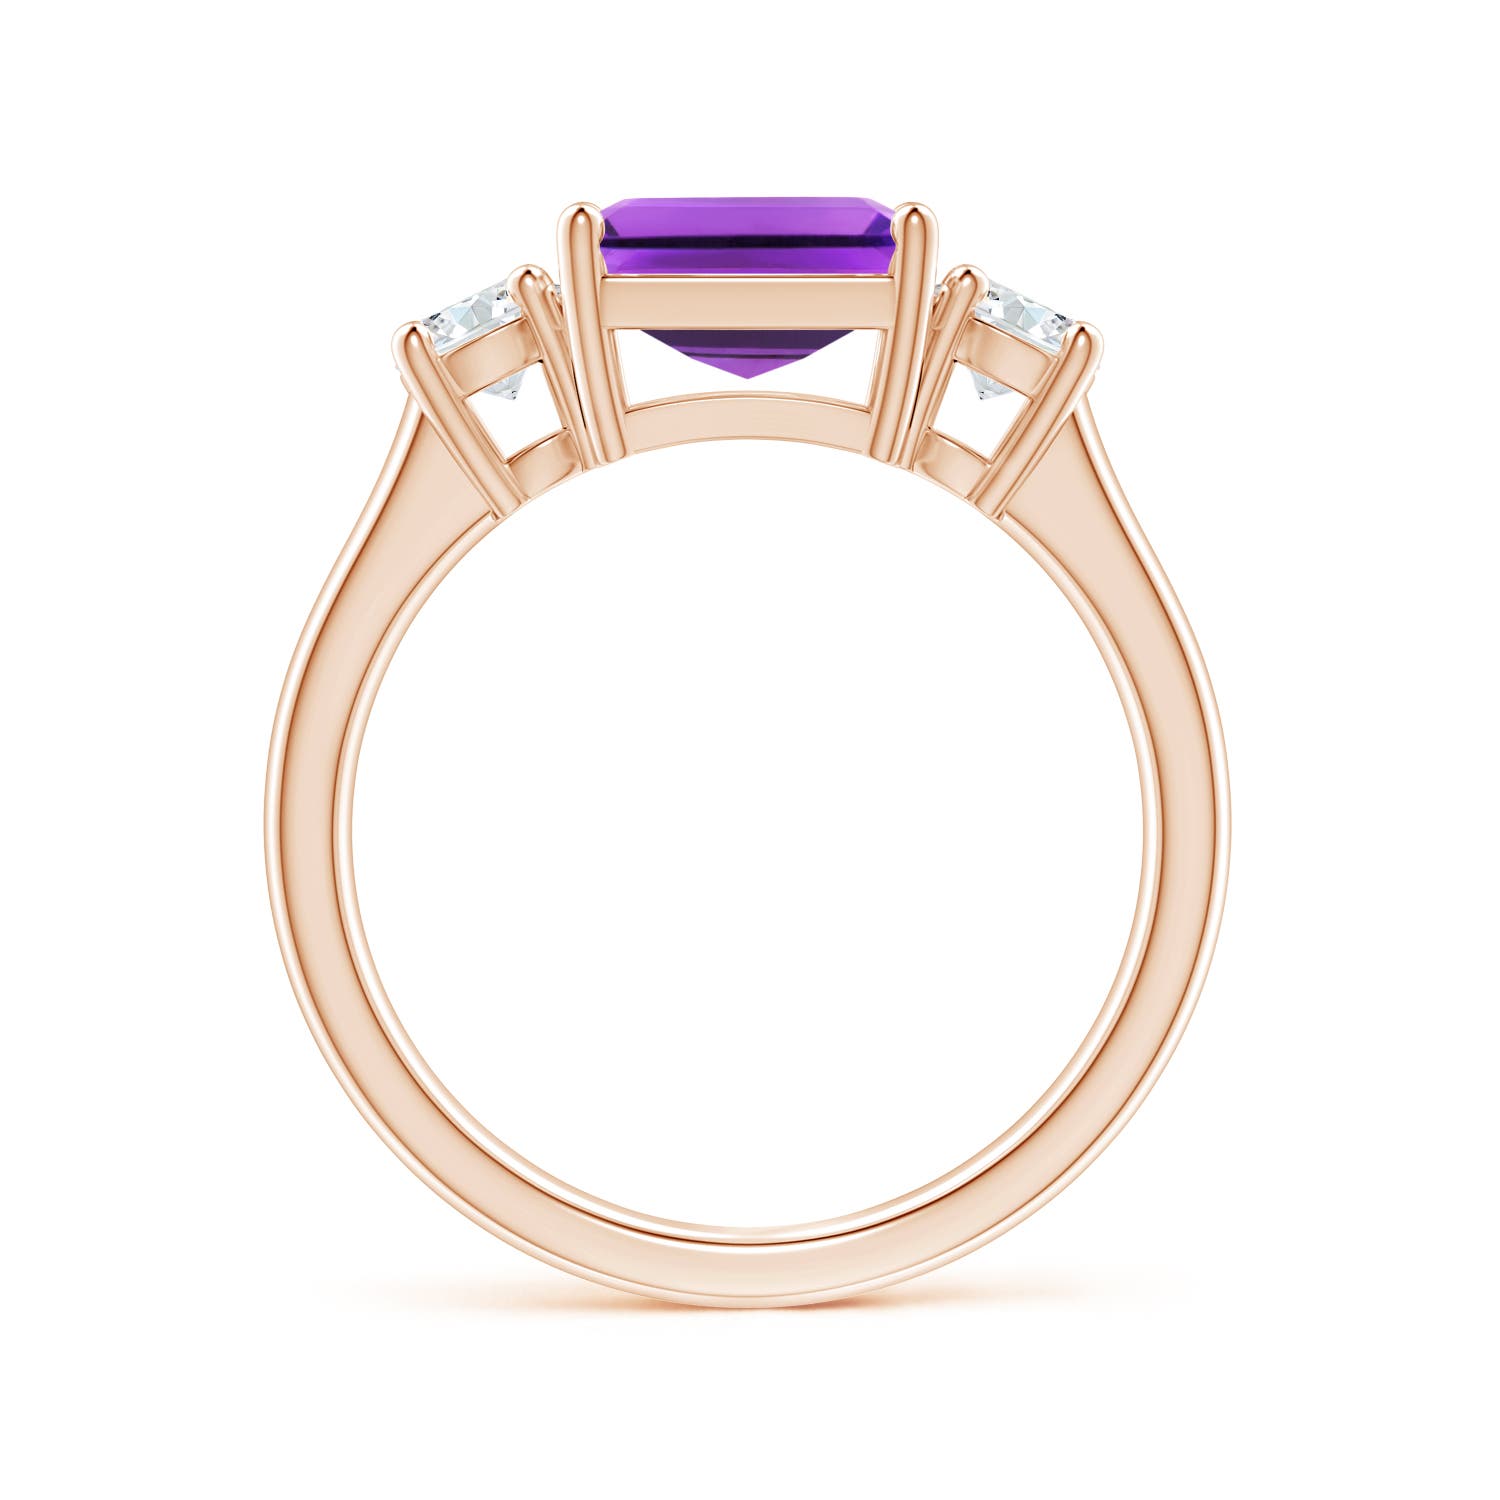 AAA - Amethyst / 2.46 CT / 14 KT Rose Gold